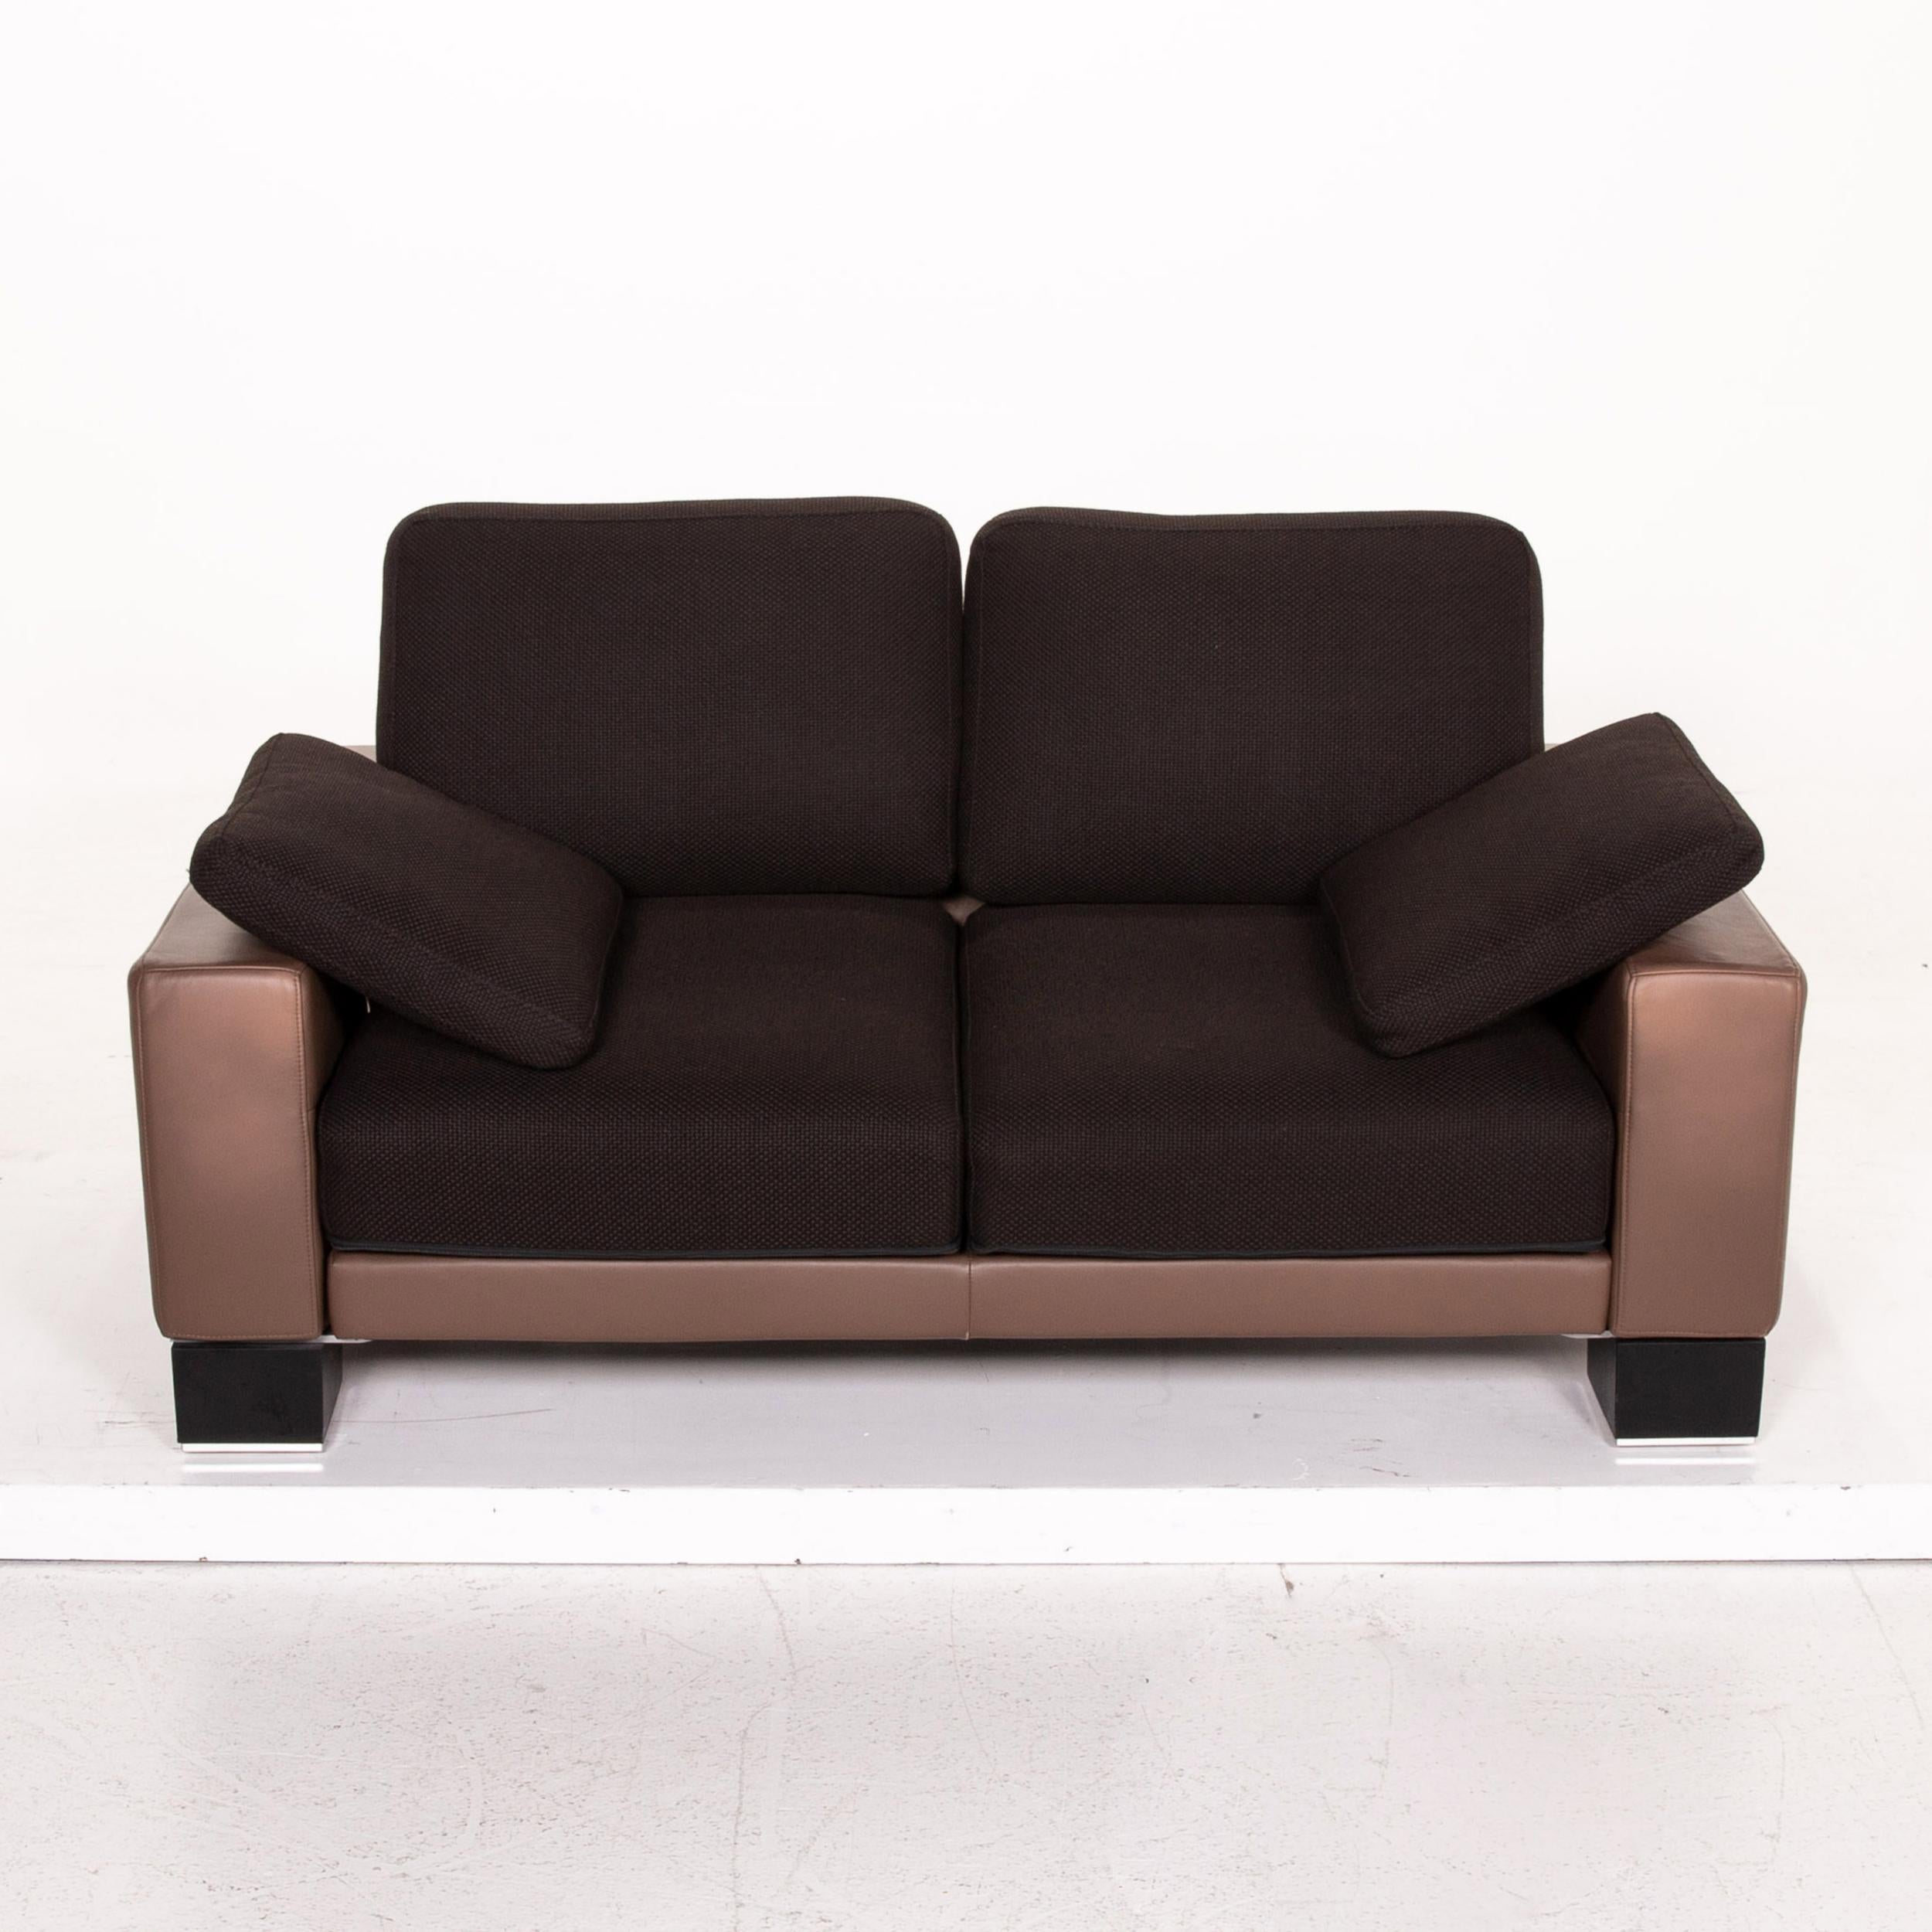 Rolf Benz Ego Leather Fabric Sofa Brown Dark Brown Two-Seat Function Couch 2